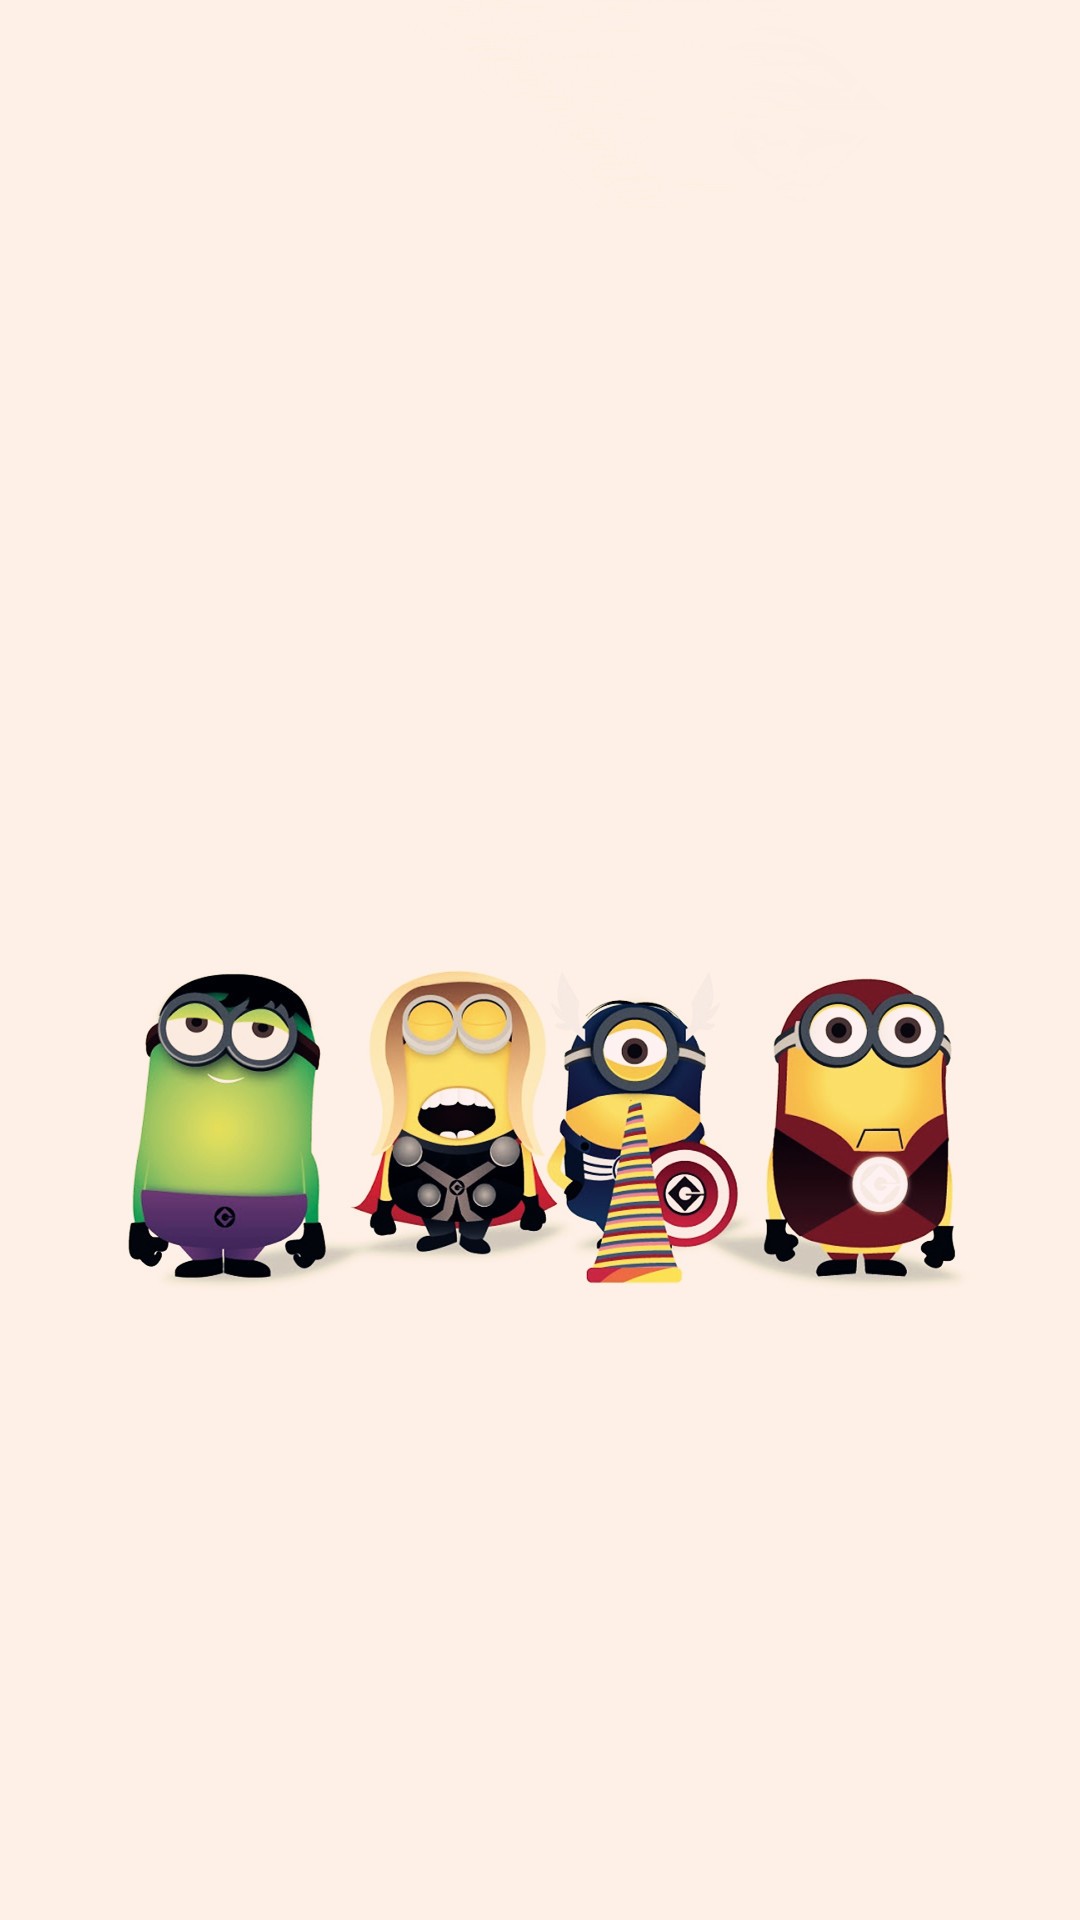 Free Download Wallpaper Weekends Mighty Minions Marvel Superheroes For Your Iphone 1080x19 For Your Desktop Mobile Tablet Explore 50 Minions Iphone Wallpaper Despicable Me Iphone Wallpaper Minion Phone Wallpaper